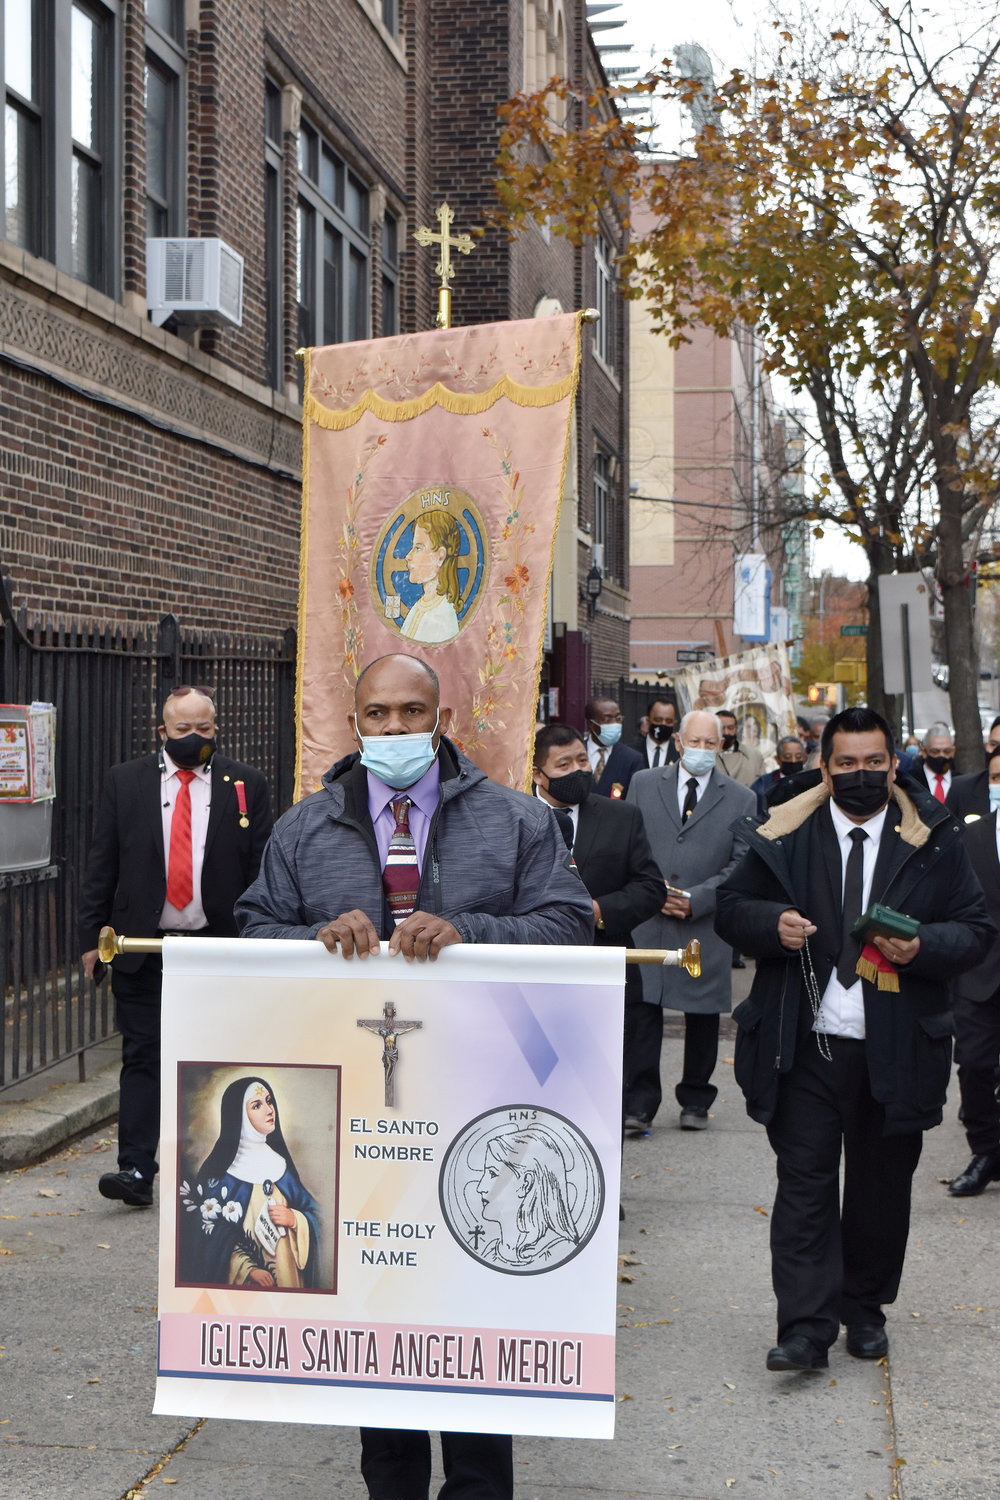 A brief procession preceded the Nov. 21 Mass at St. Angela Merici Church in the Bronx for the Feast of Christ the King. It was the third annual Mass sponsored by the Holy Name Society of New York: Hispanic Division.